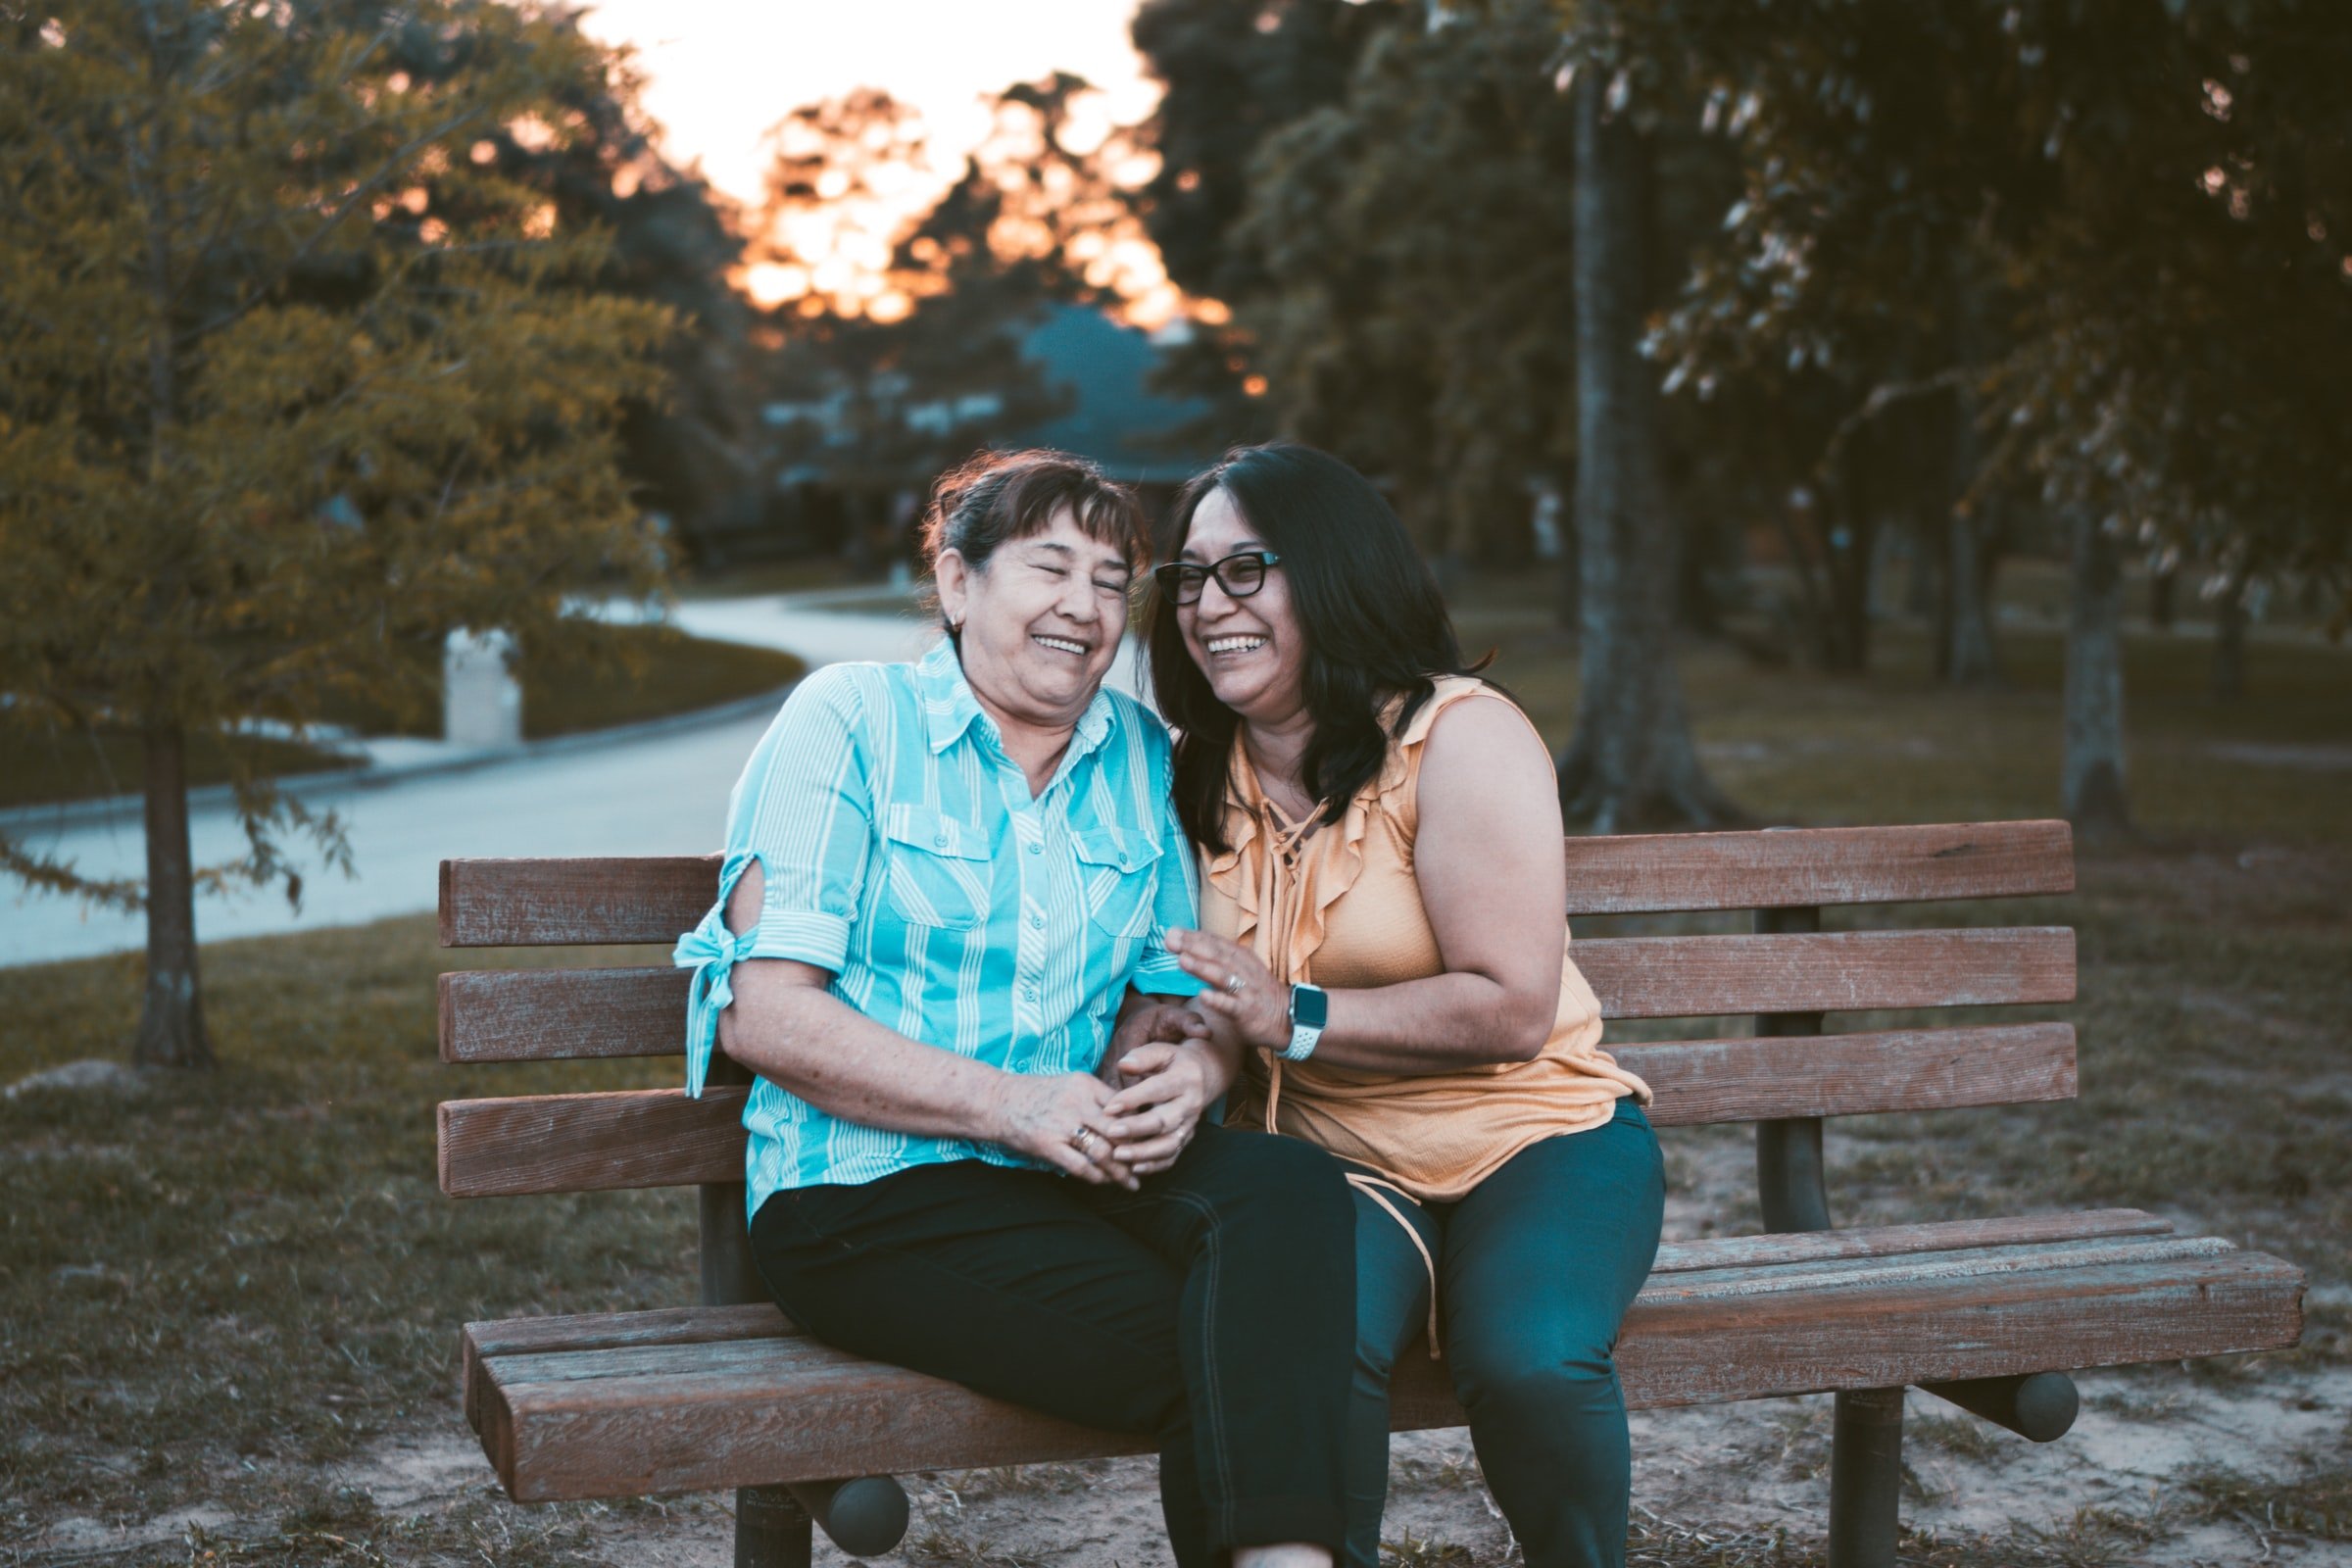 A picture of two women, sitting on a park bench, in dialogue, smiling.